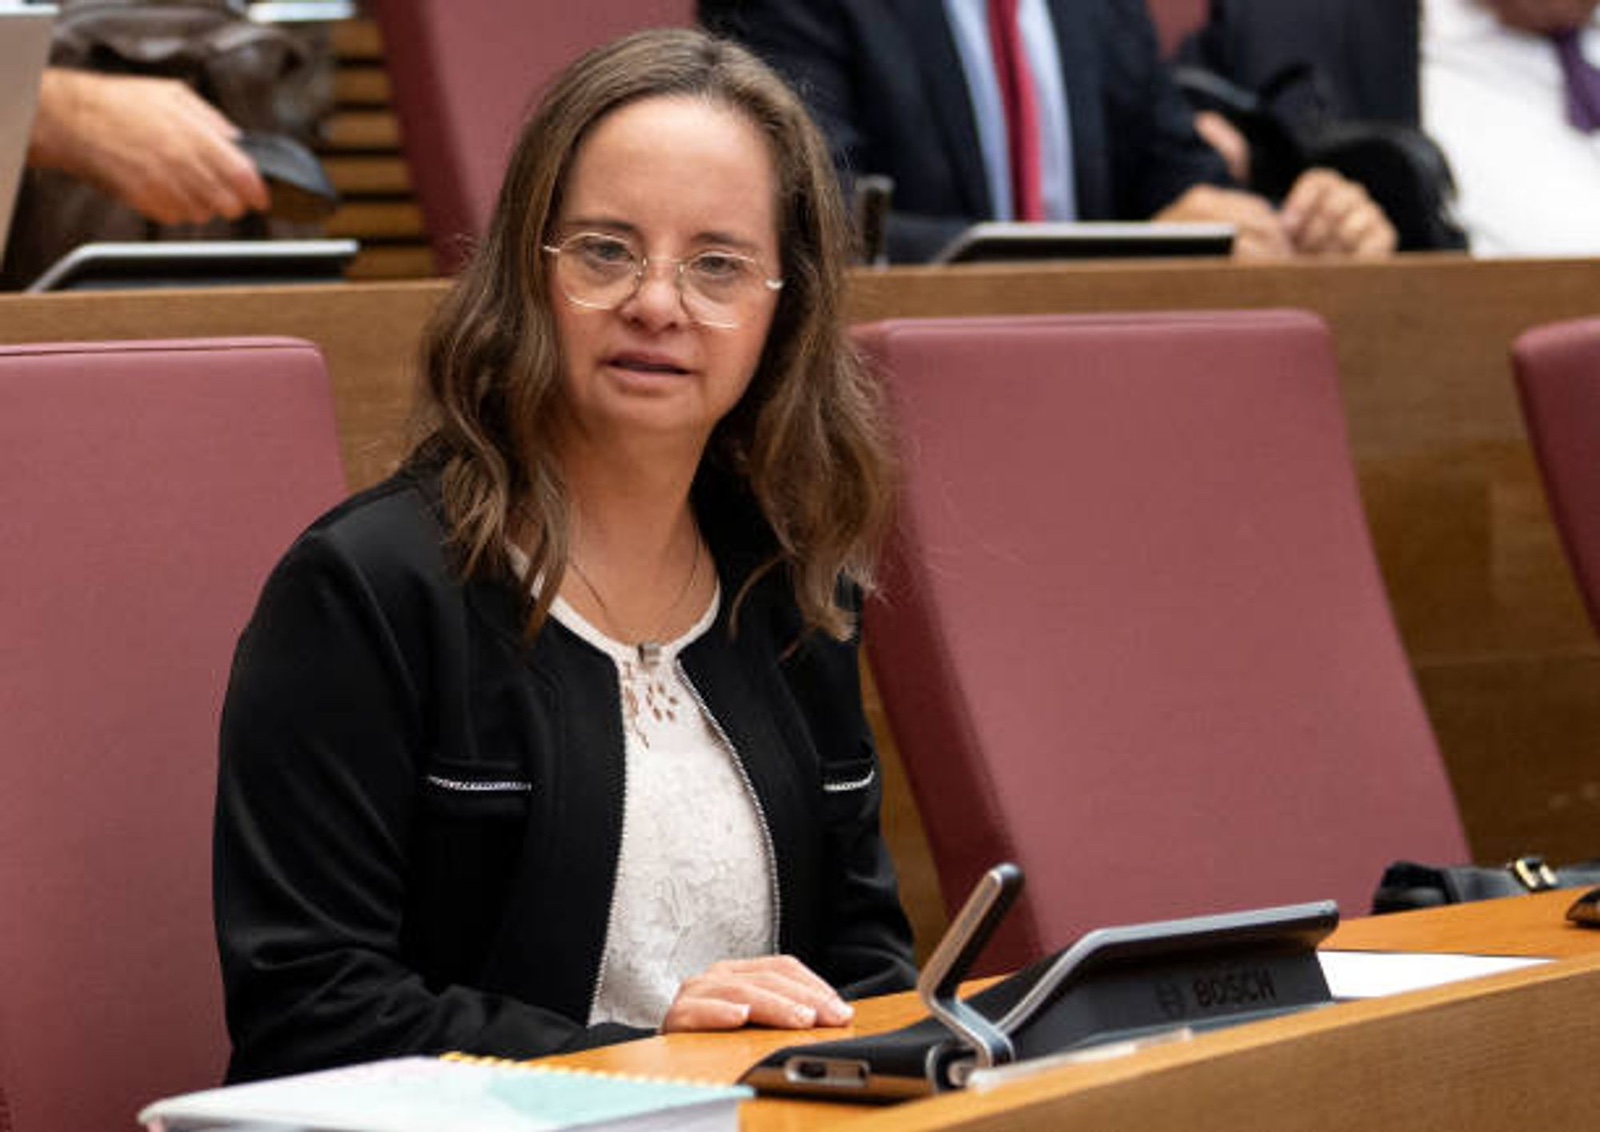 first down syndrome lawmaker in spain mar galceran